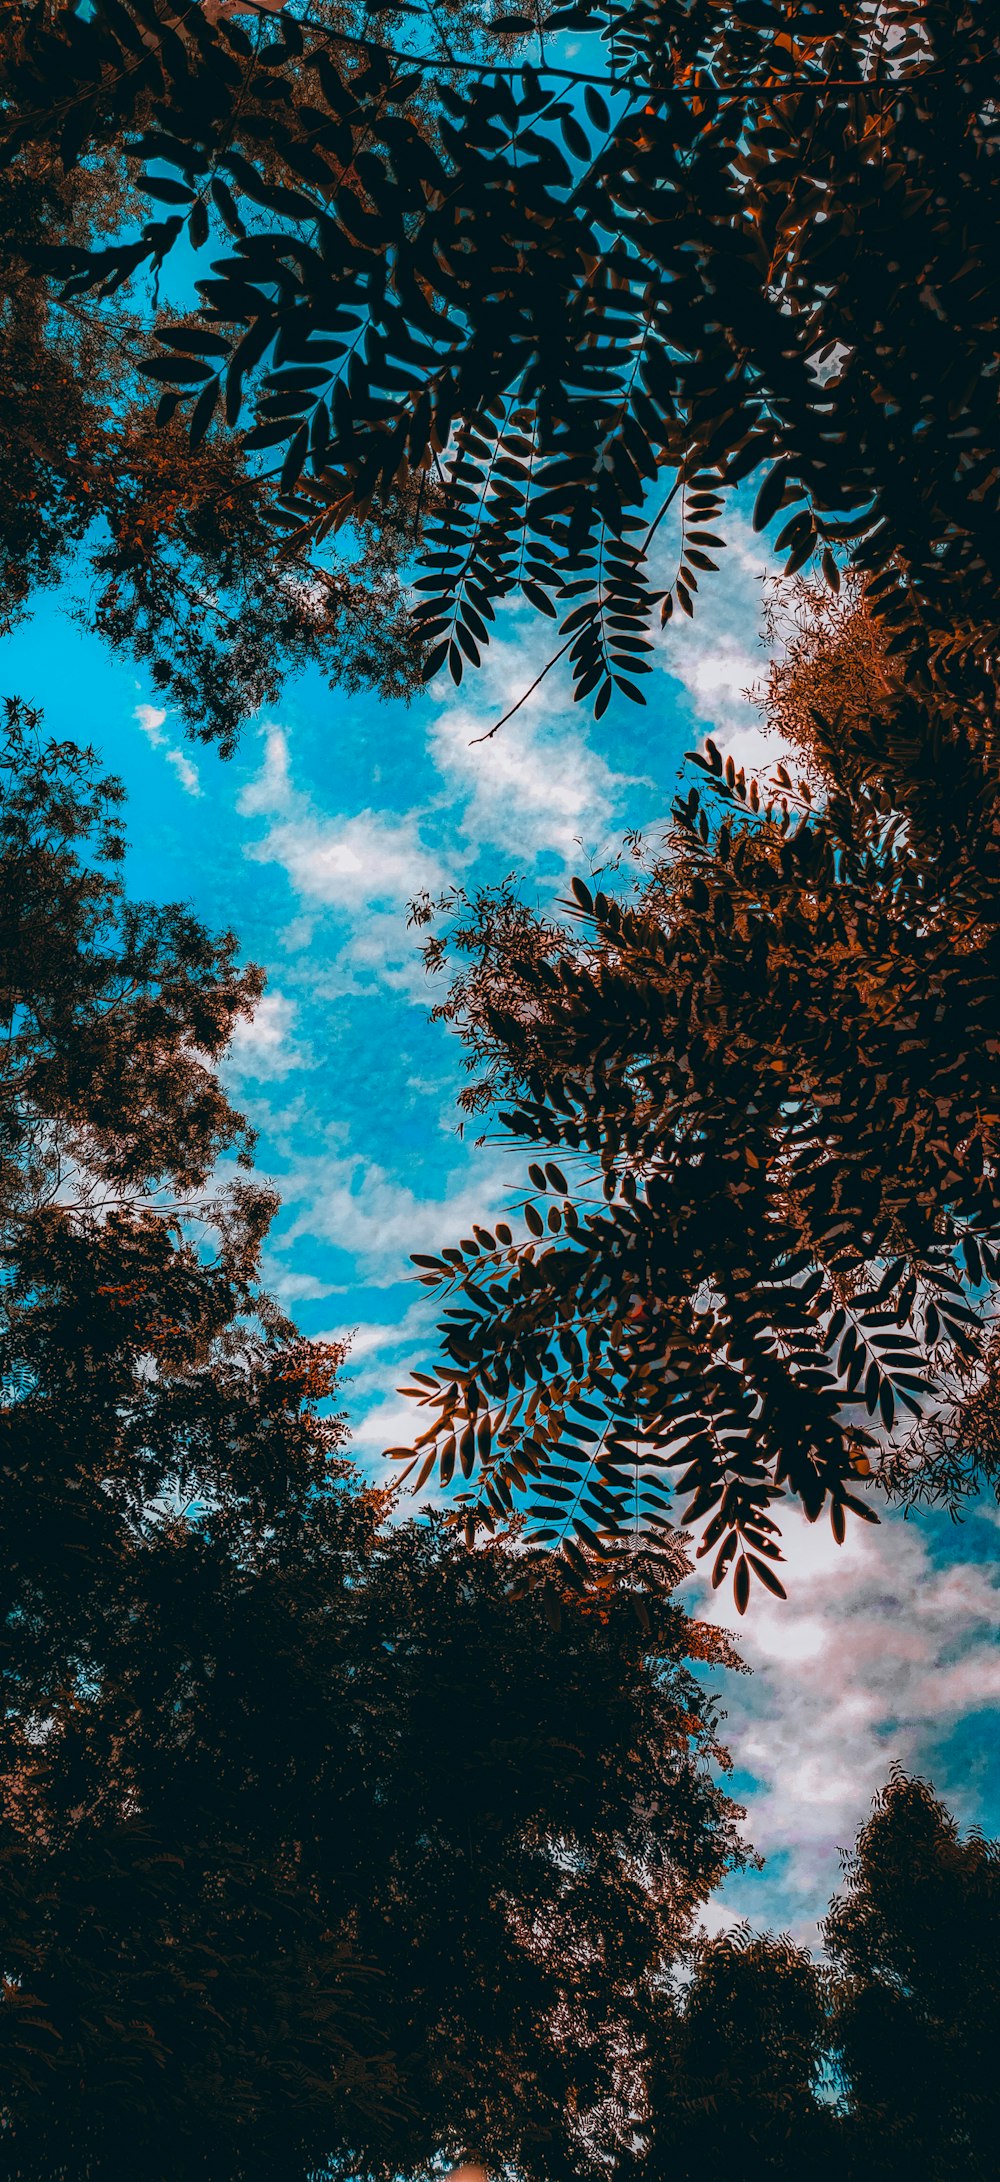 green and brown trees under blue sky